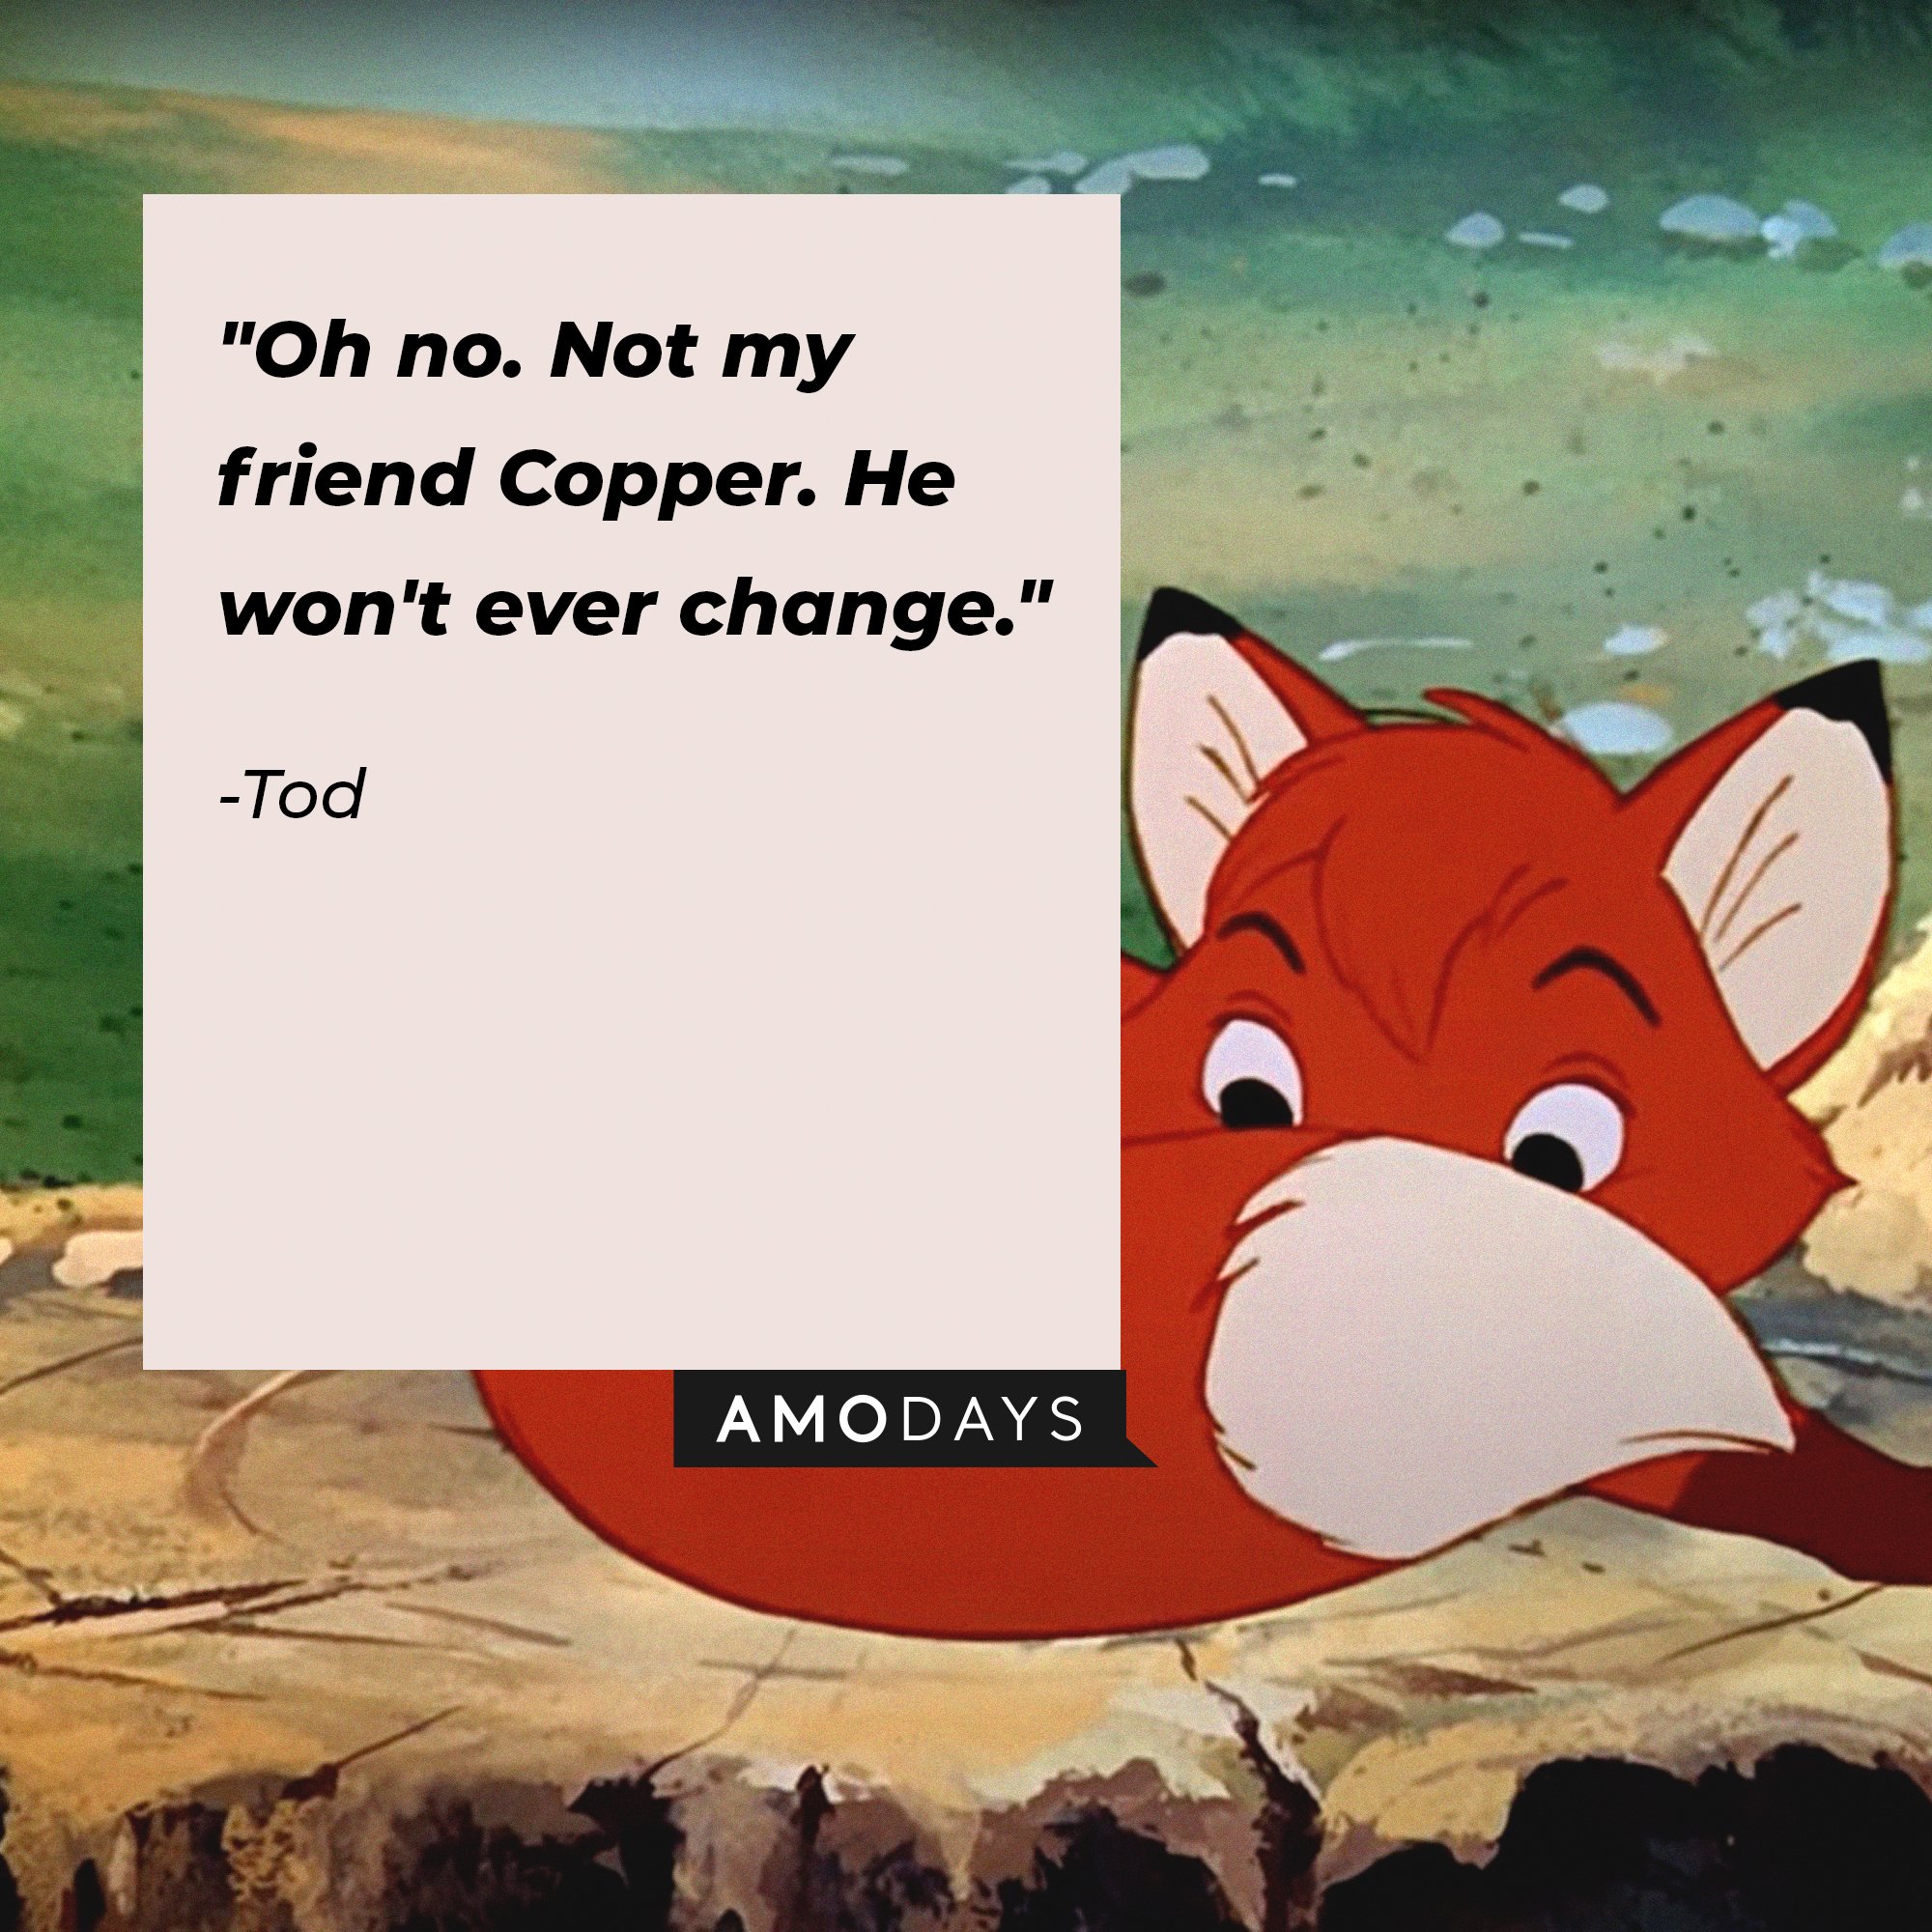 Tod’s quote: "Oh no. Not my friend Copper. He won't ever change." | Image: AmoDays